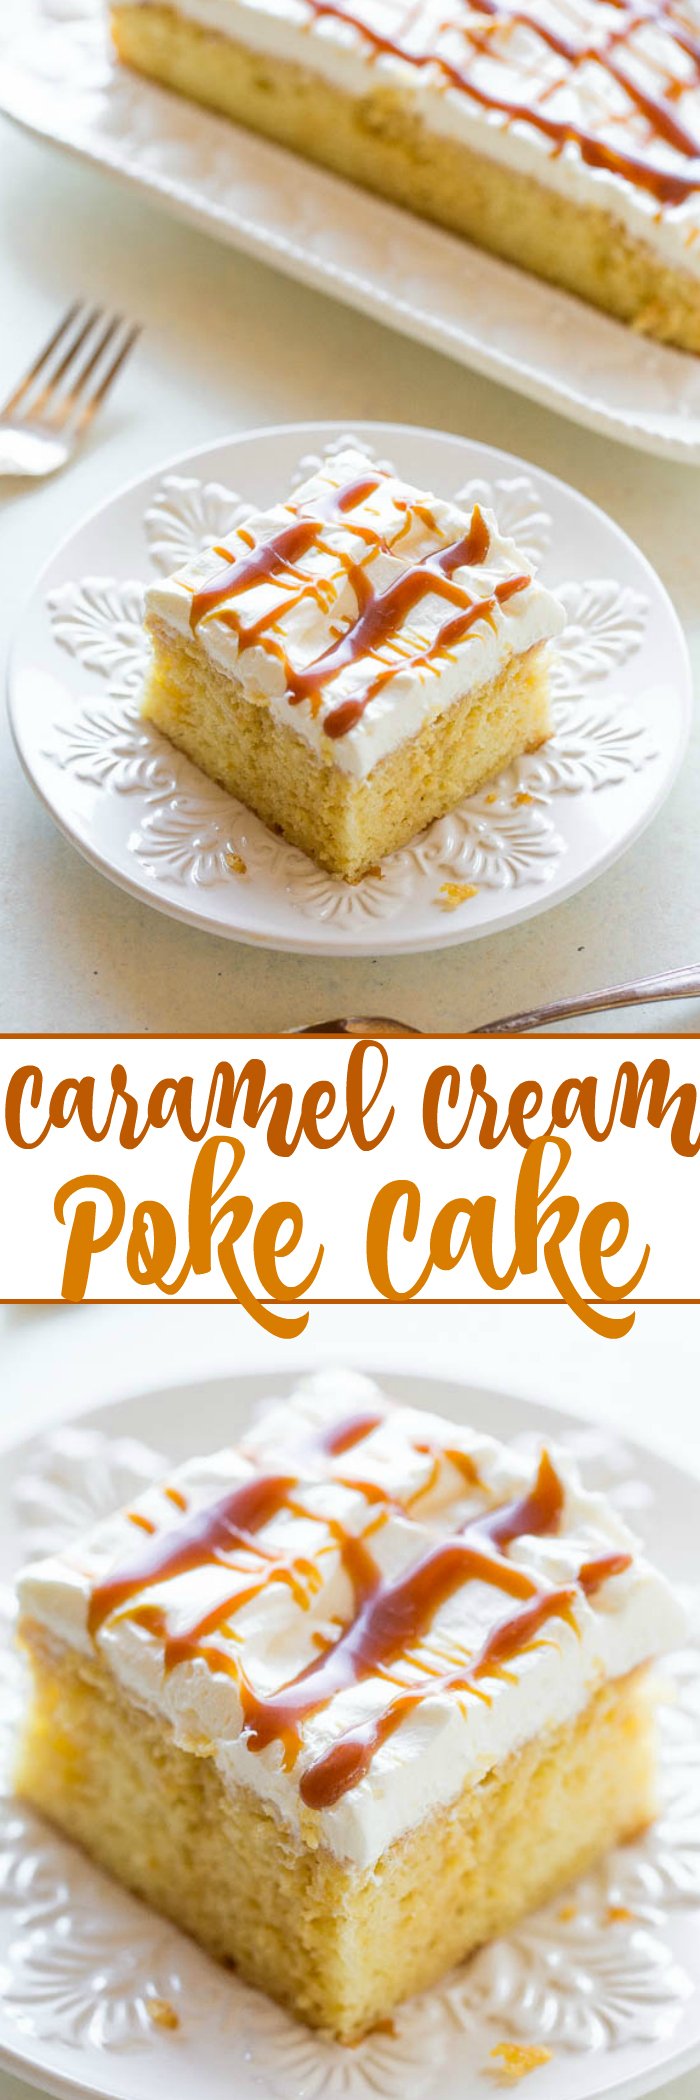 Caramel Cream Poke Cake - A creamy caramel mixture soaks into soft yellow cake before being topped with whipped cream and more CARAMEL!! An easy cake that's a guaranteed WINNER especially with caramel lovers!!